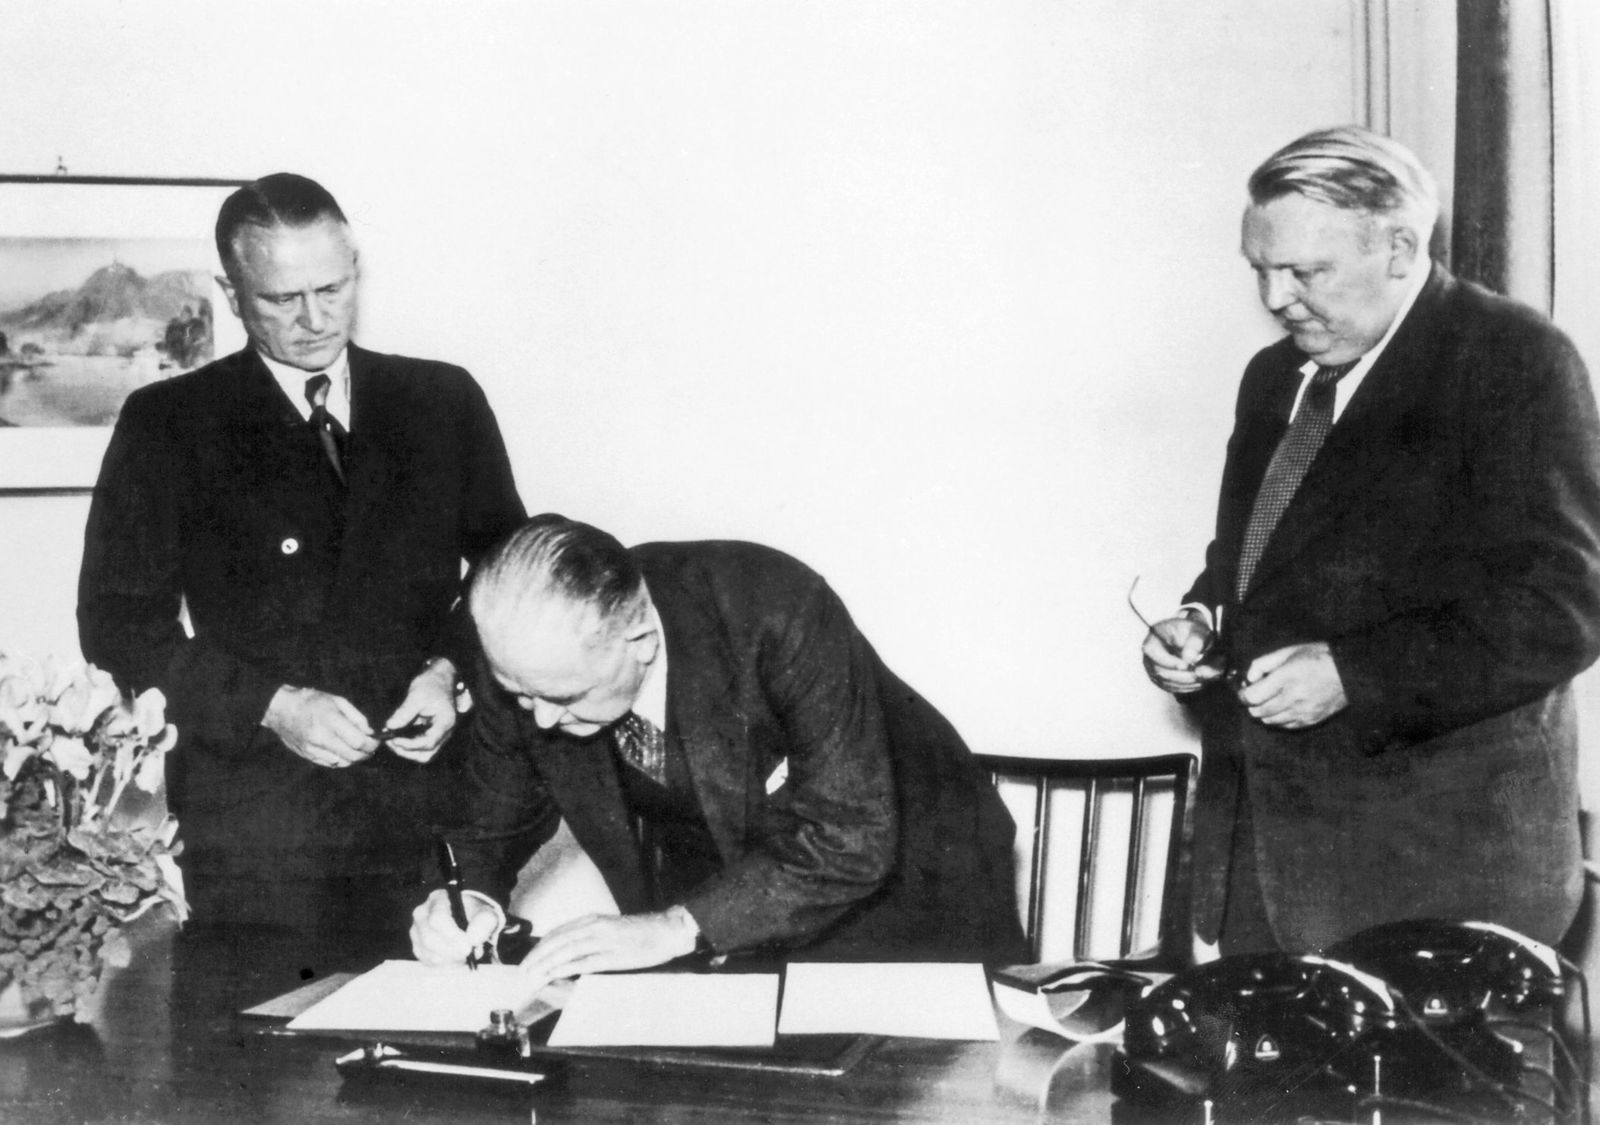 70 years ago, the United Kingdom handed over trustee-ship of Volkswagen to the Federal Republic of Germany